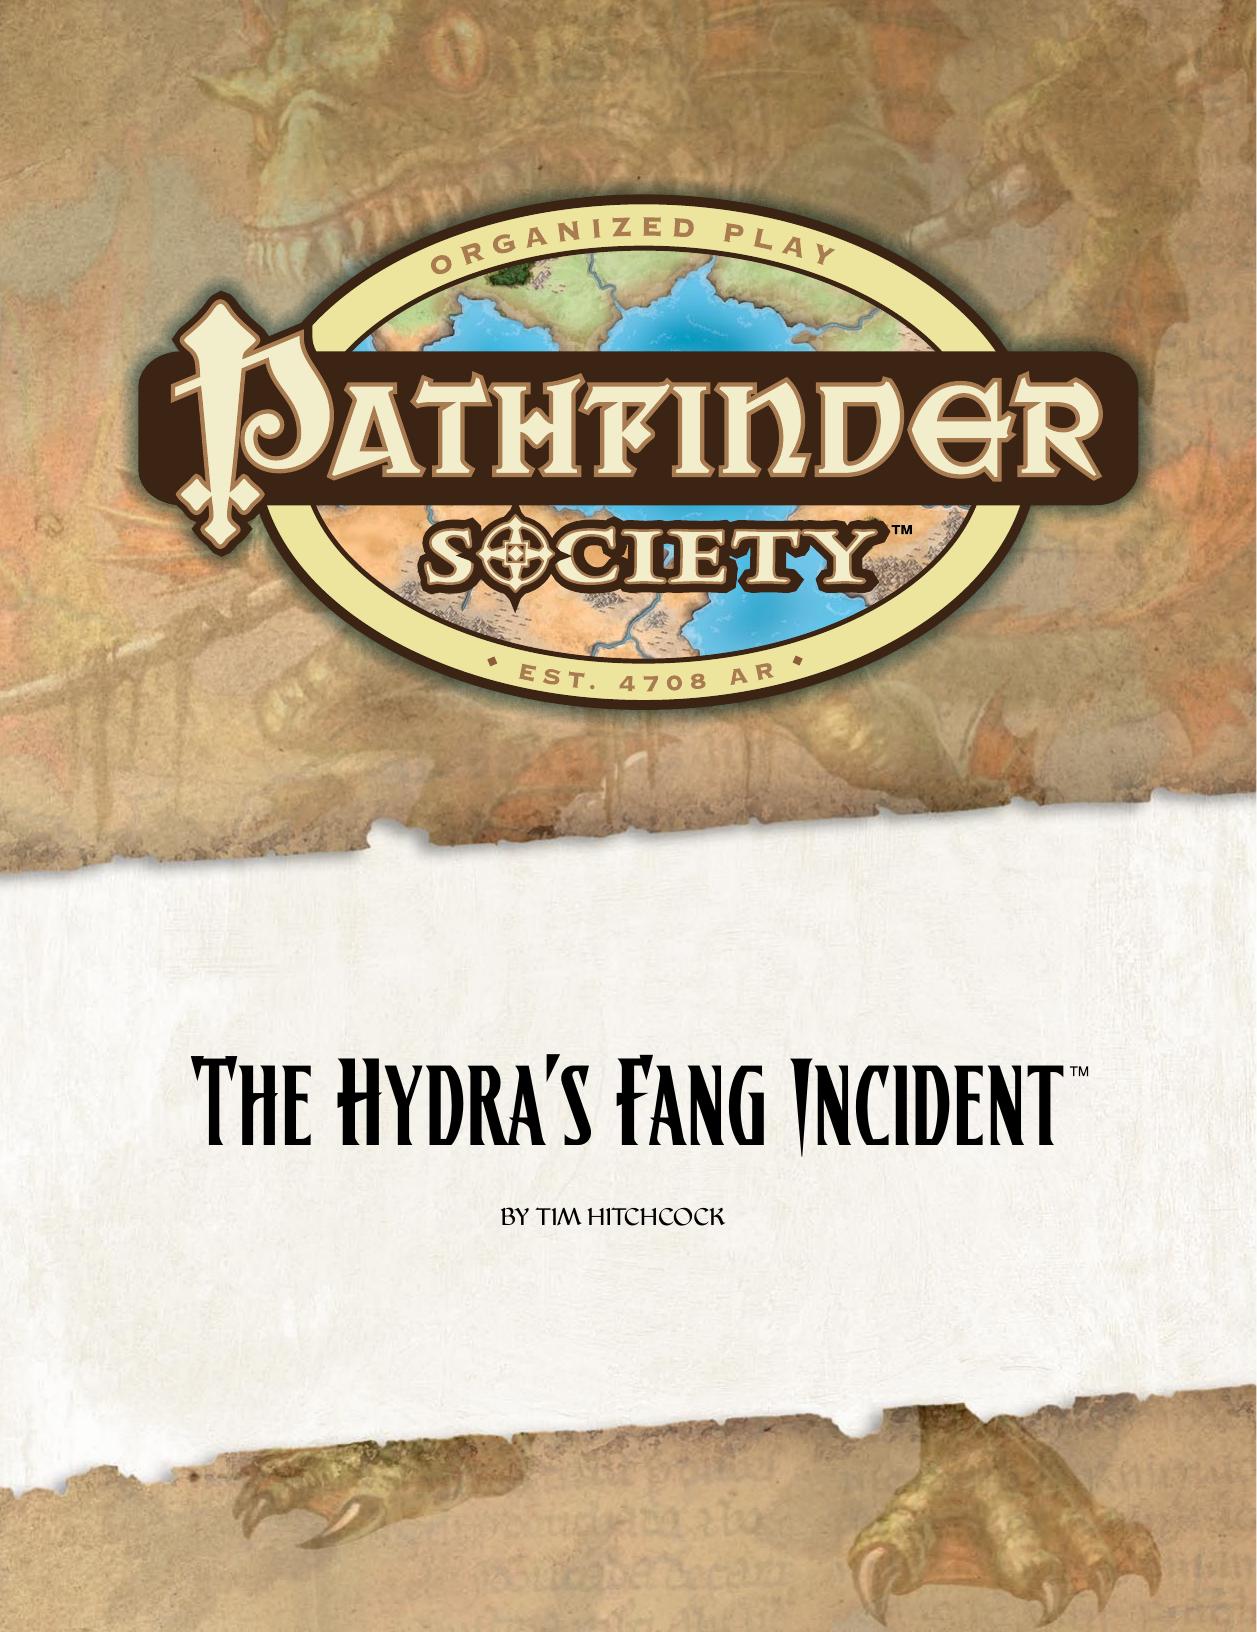 Pathfinder Society: The Hydra's Fang Incident